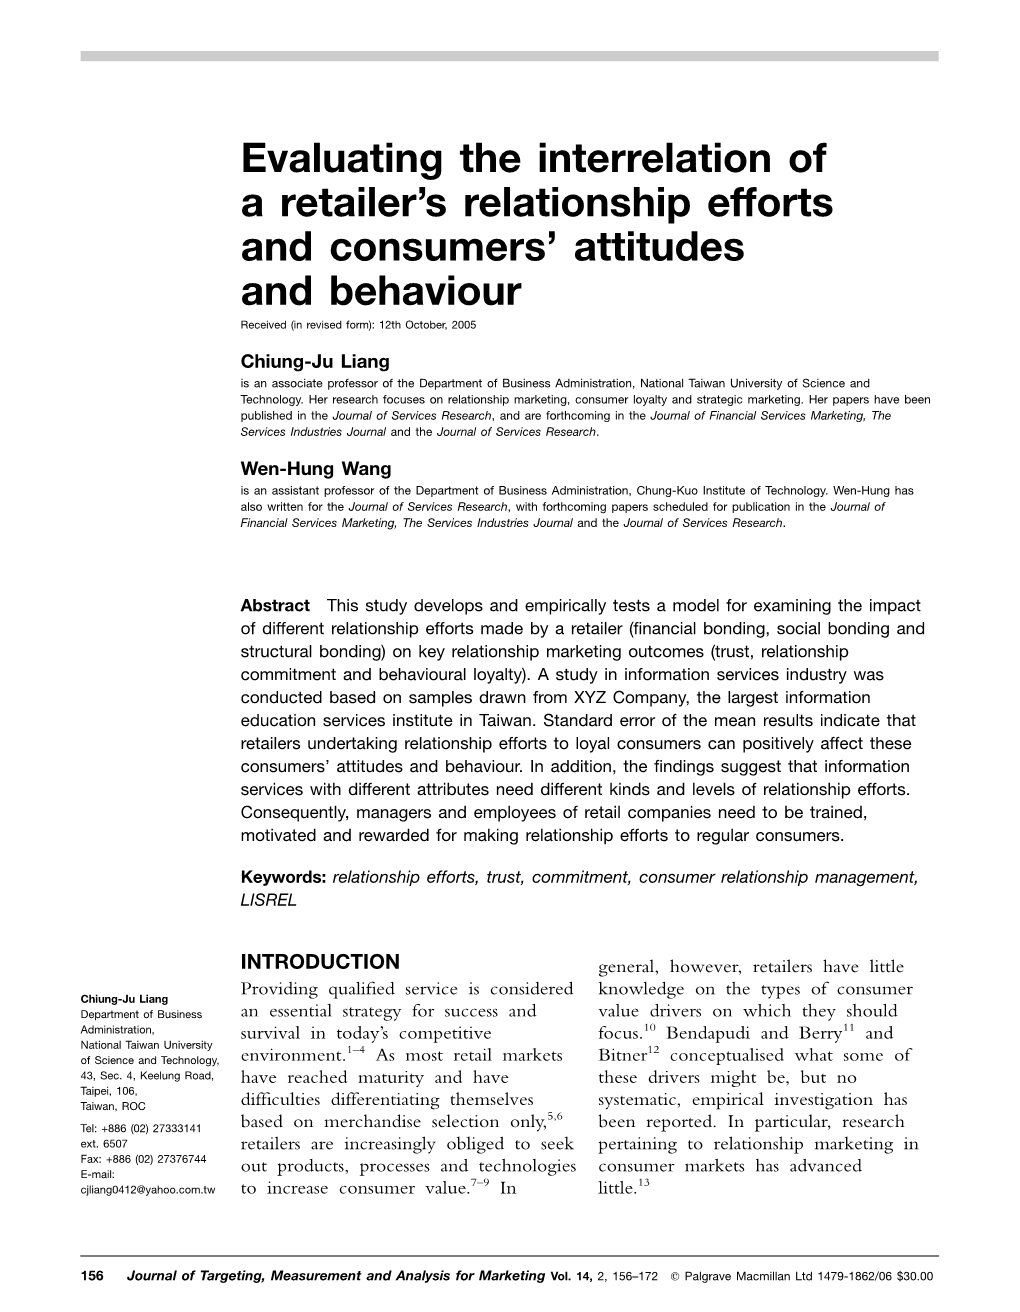 Evaluating the Interrelation of a Retailer's Relationship Efforts And